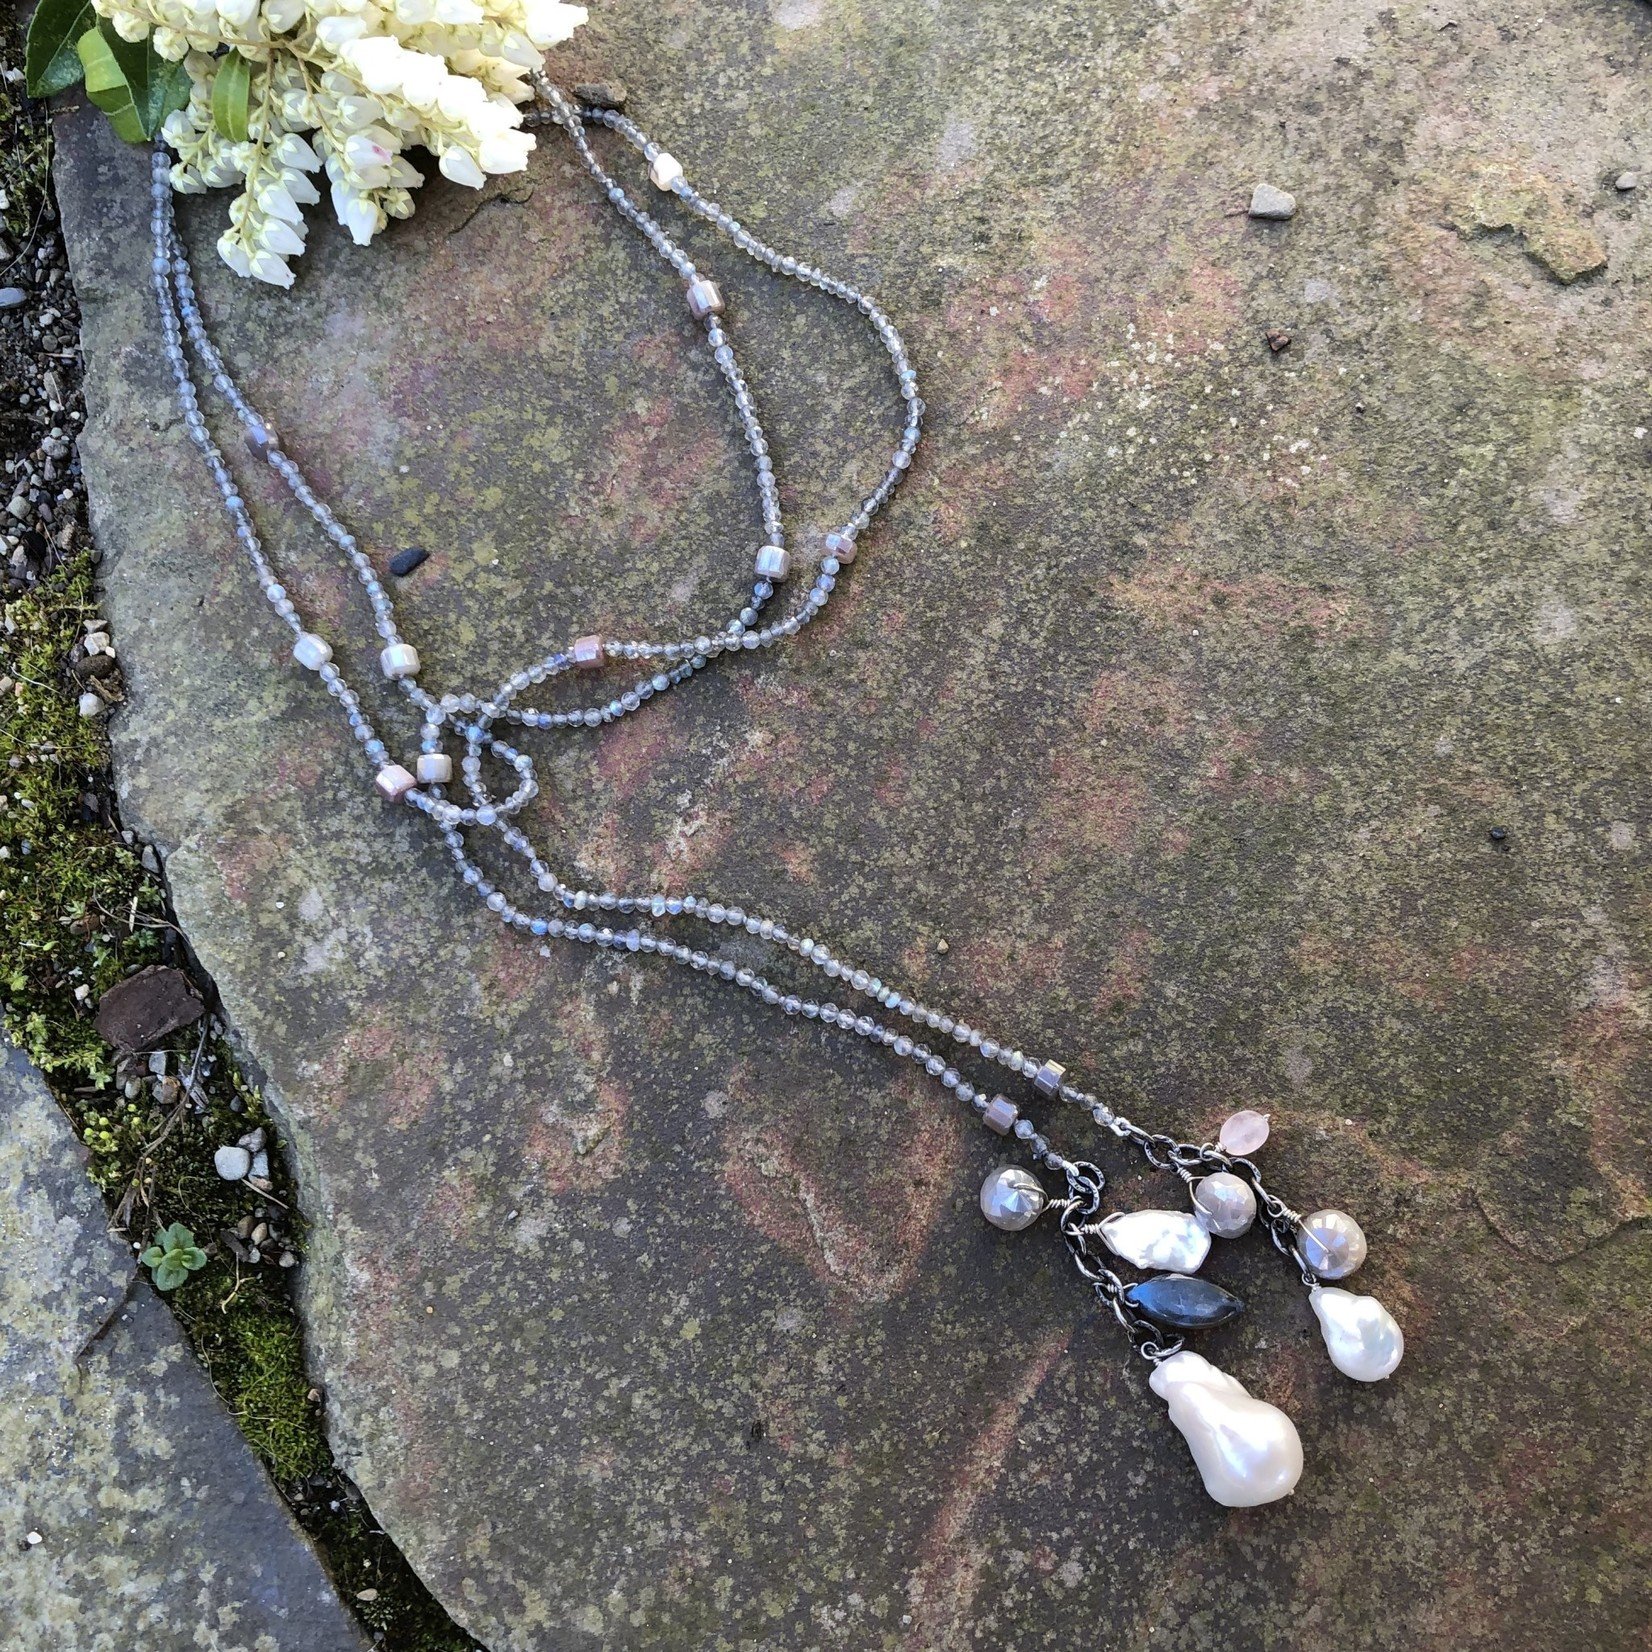 SoMe So Me Designs | Draped in Beauty Necklace. 50 inches long with Baroque Pearls, labradorite, Silverite, Moonstone, Quartz